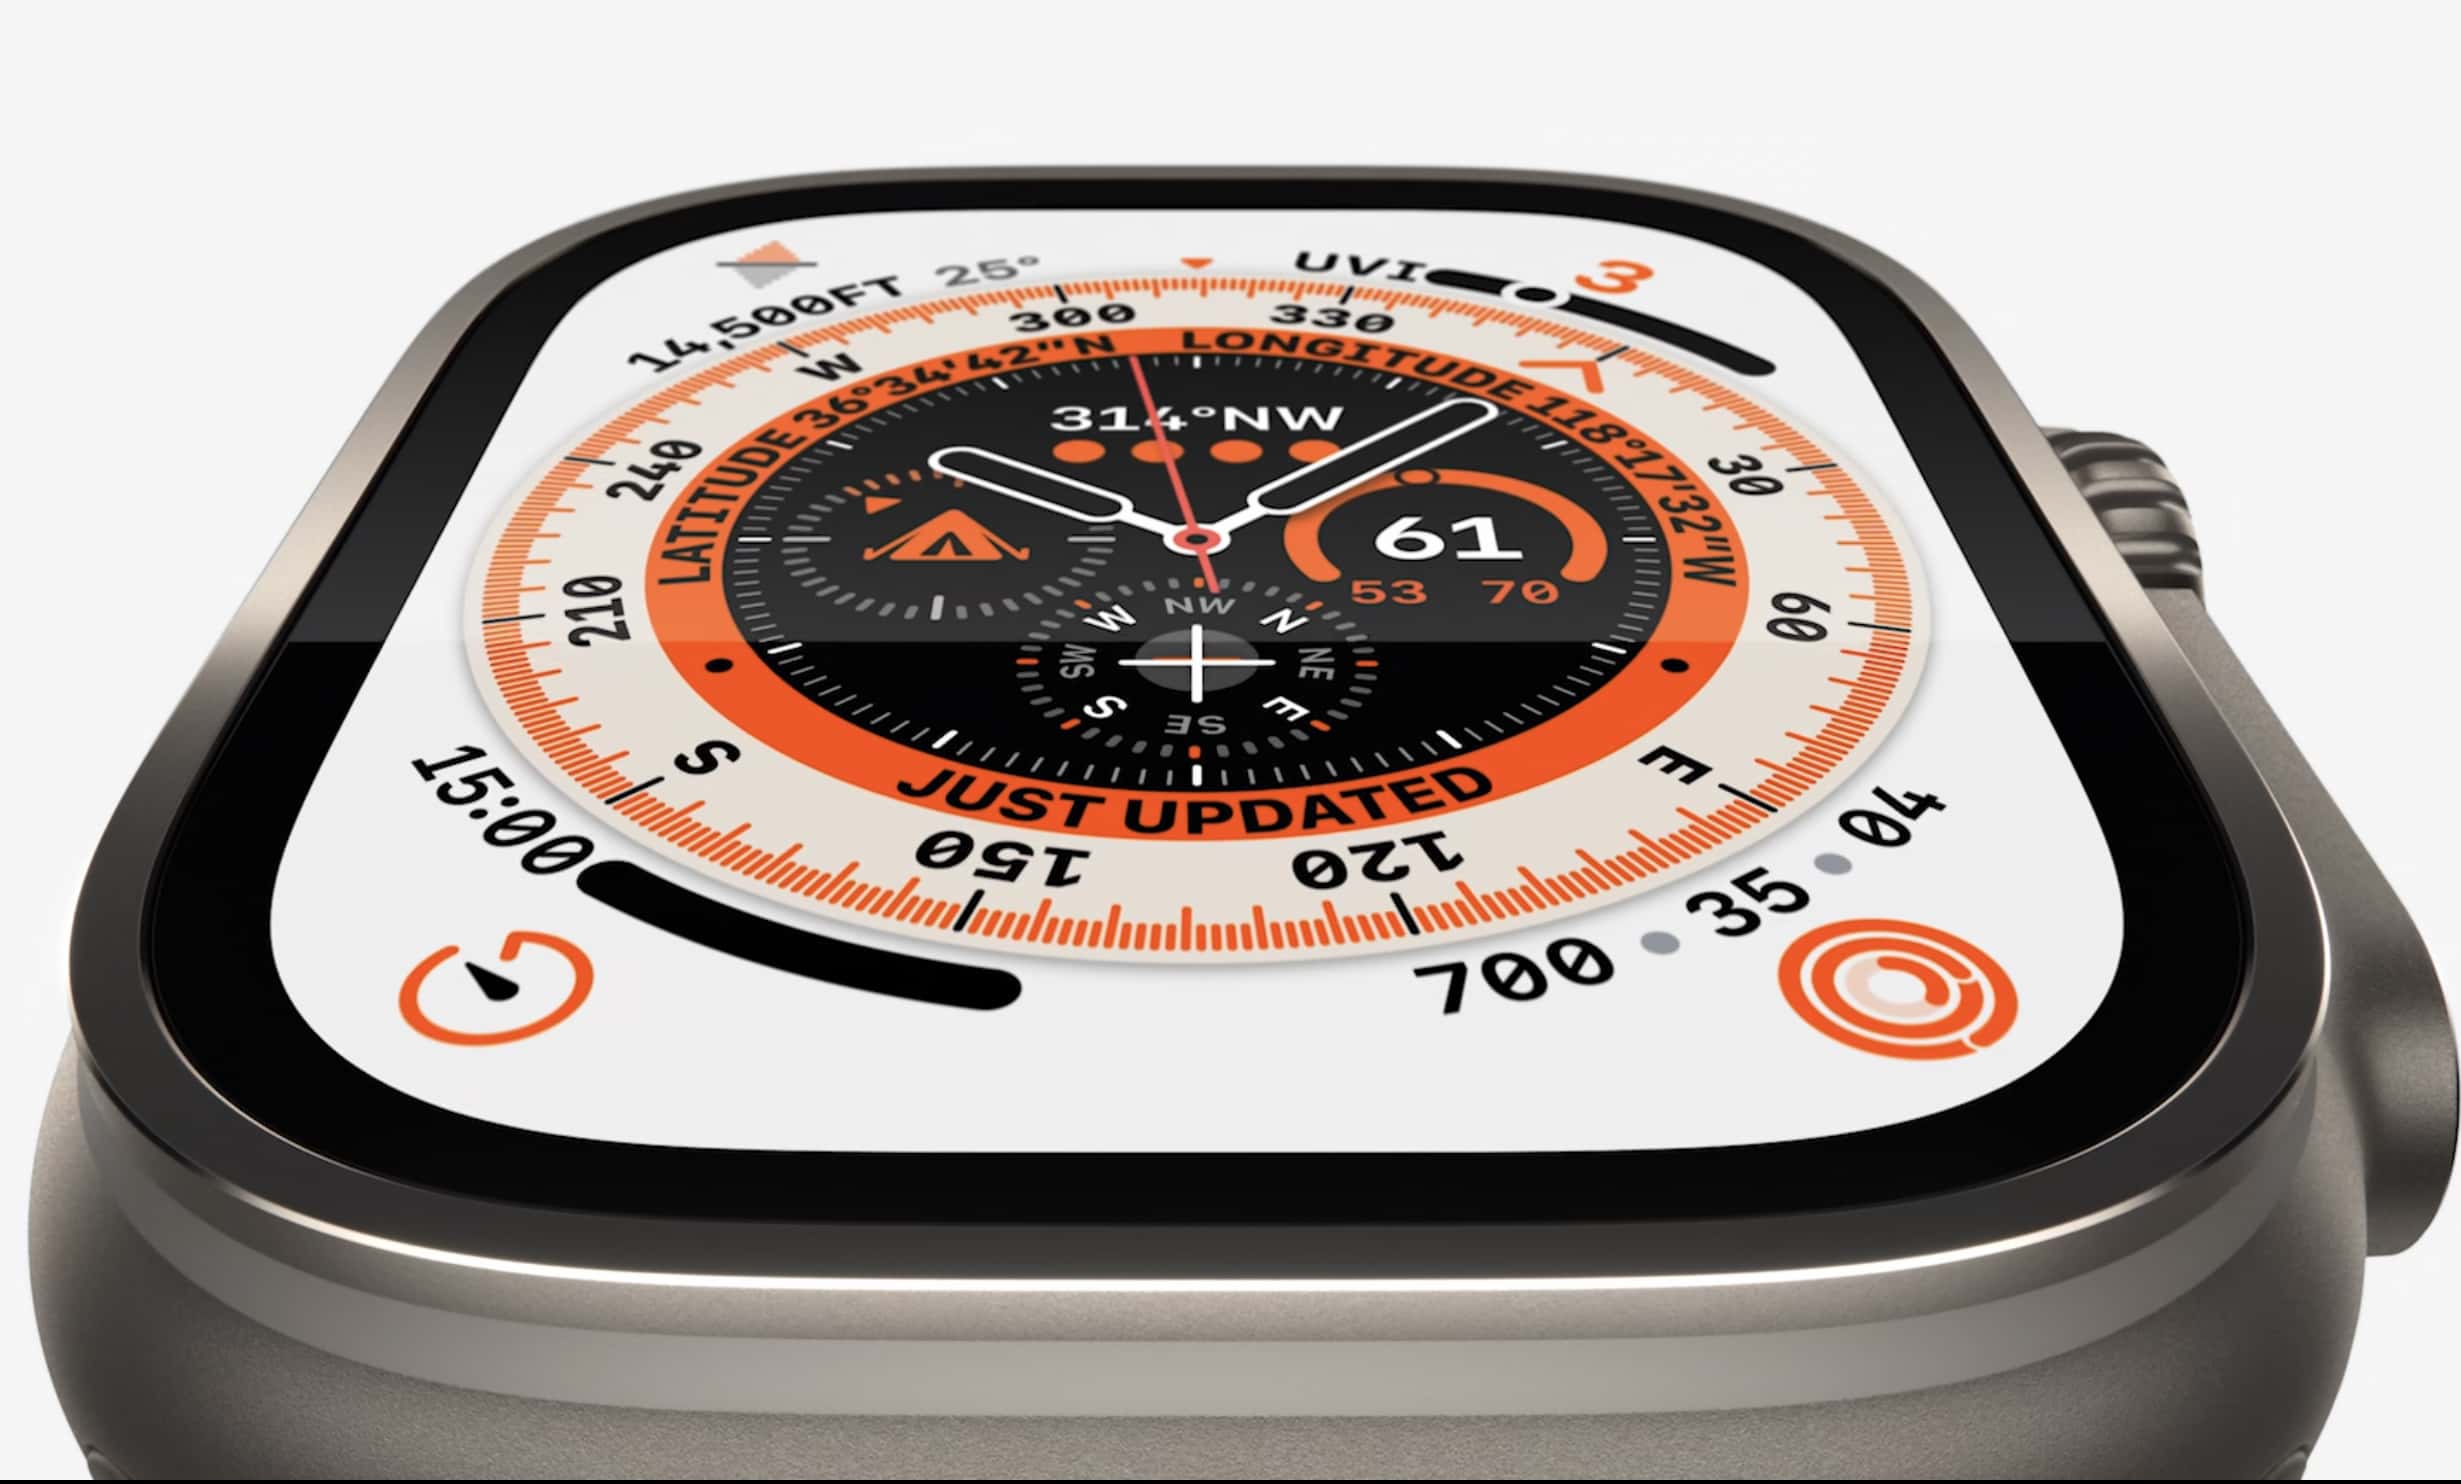 The Ultra features specially designed watch faces